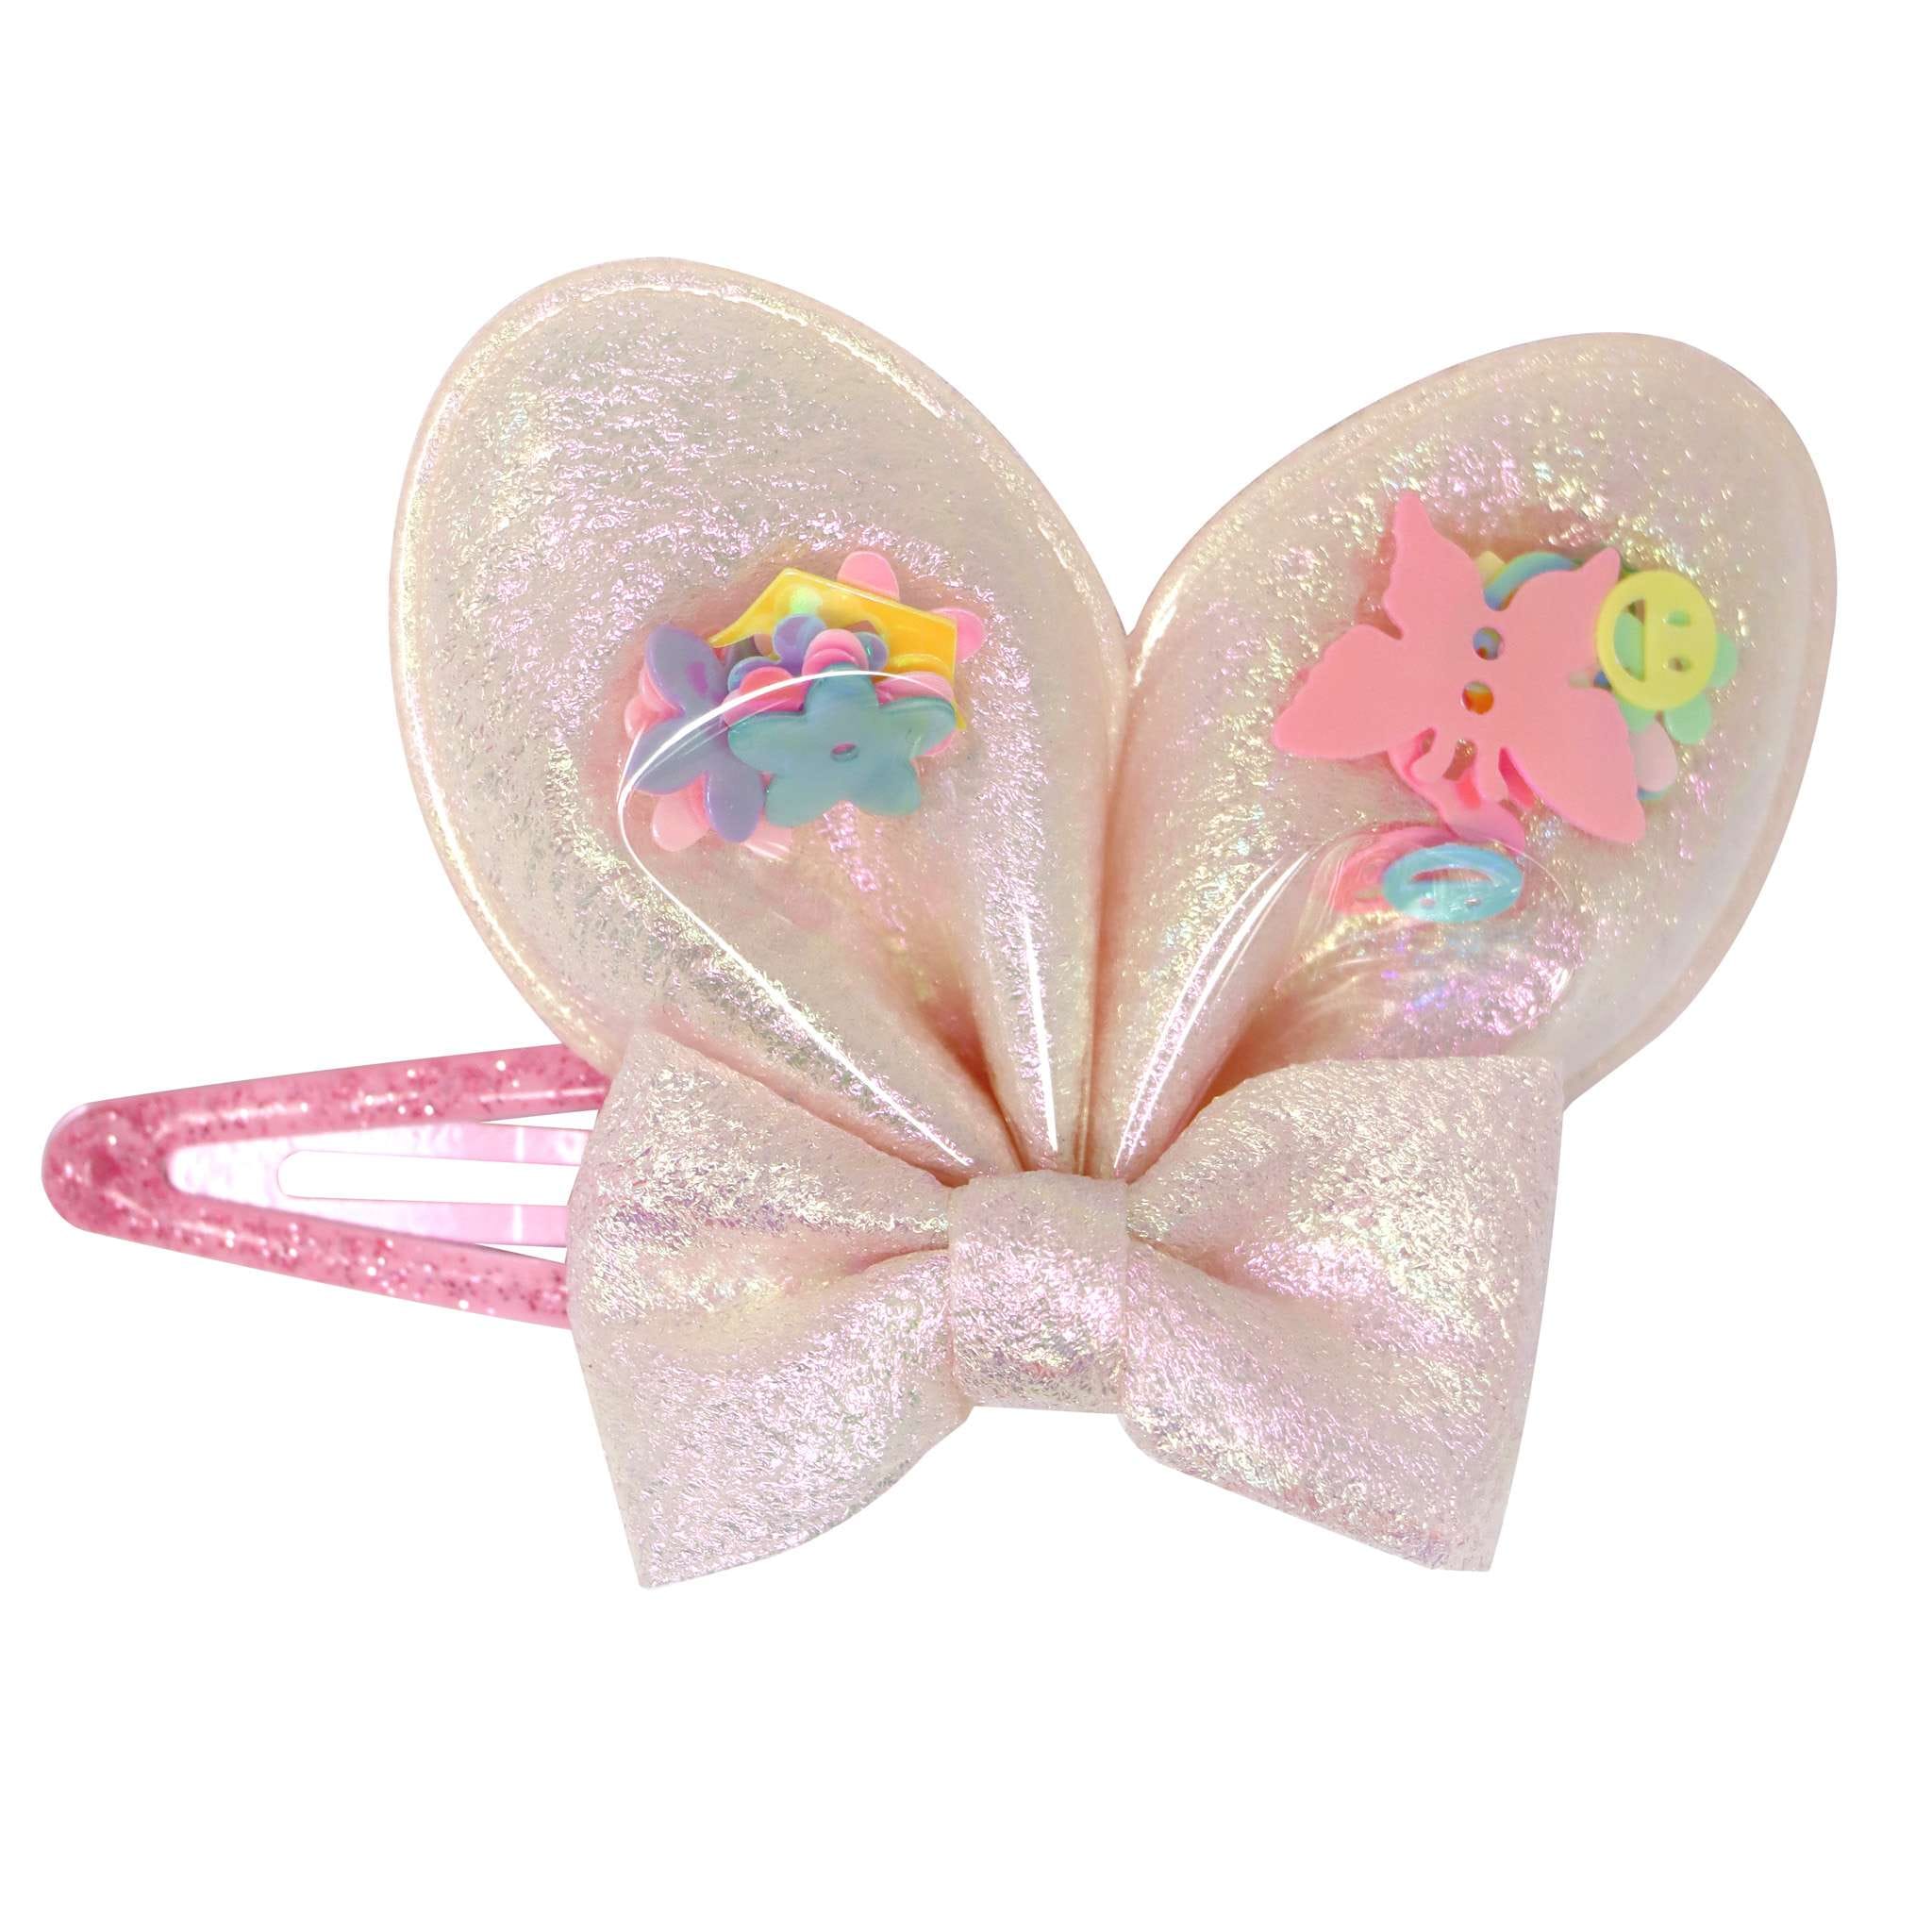 Pink Poppy Accessory Hair Easter Fun Holographic Glitter Hair Clips